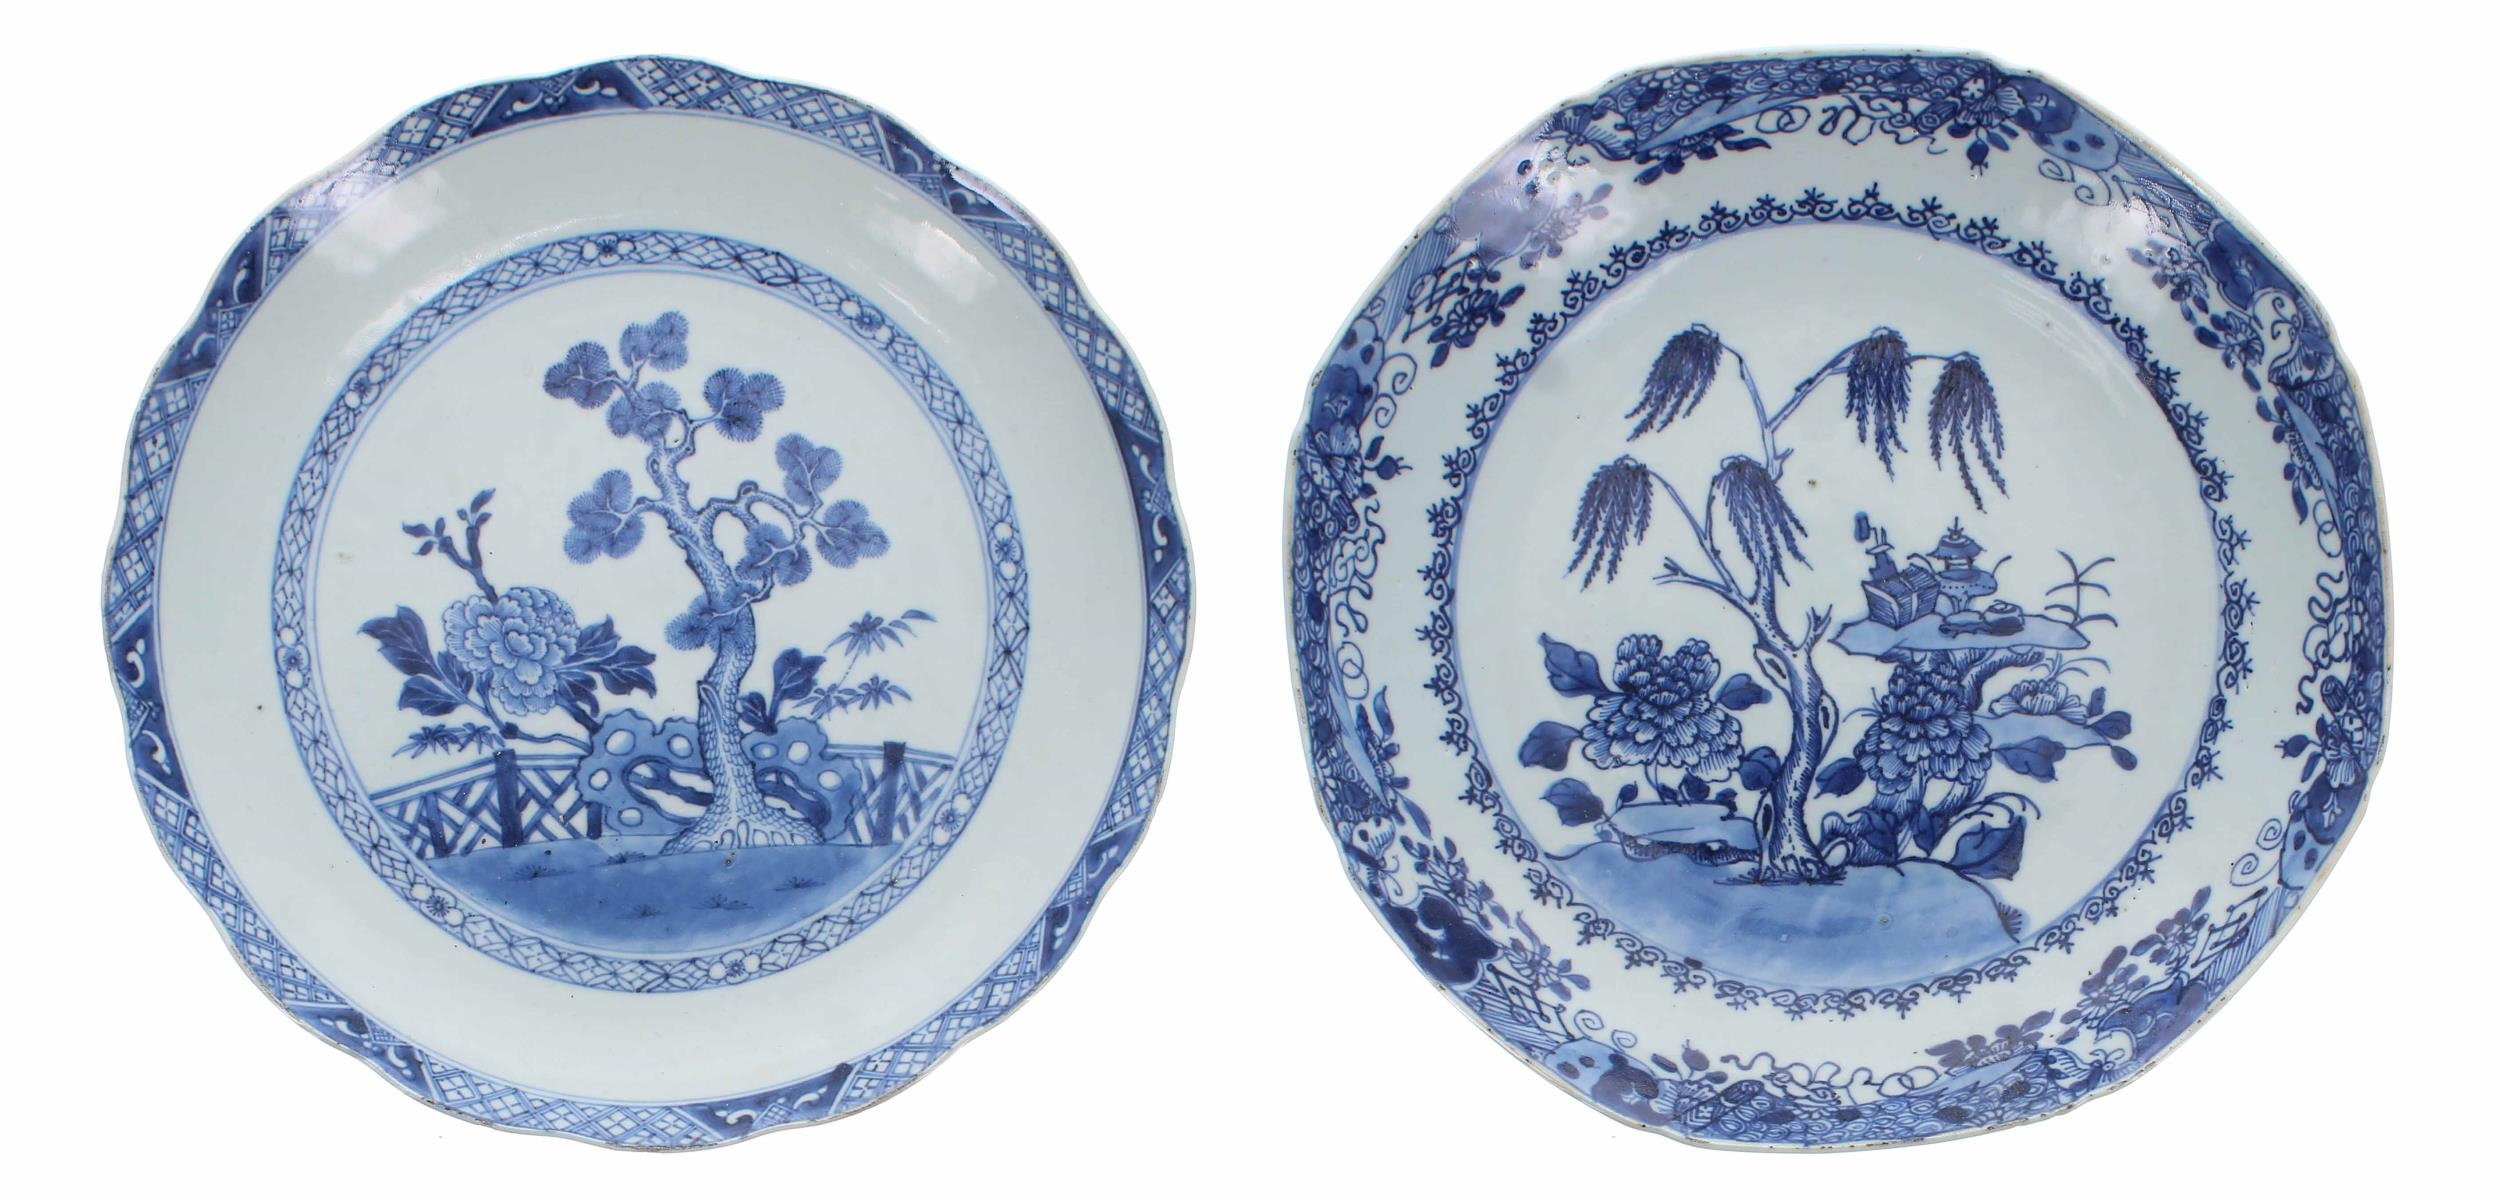 Pair of Chinese export blue and white porcelain circular plates, decorated with boats in a landscape - Image 2 of 4